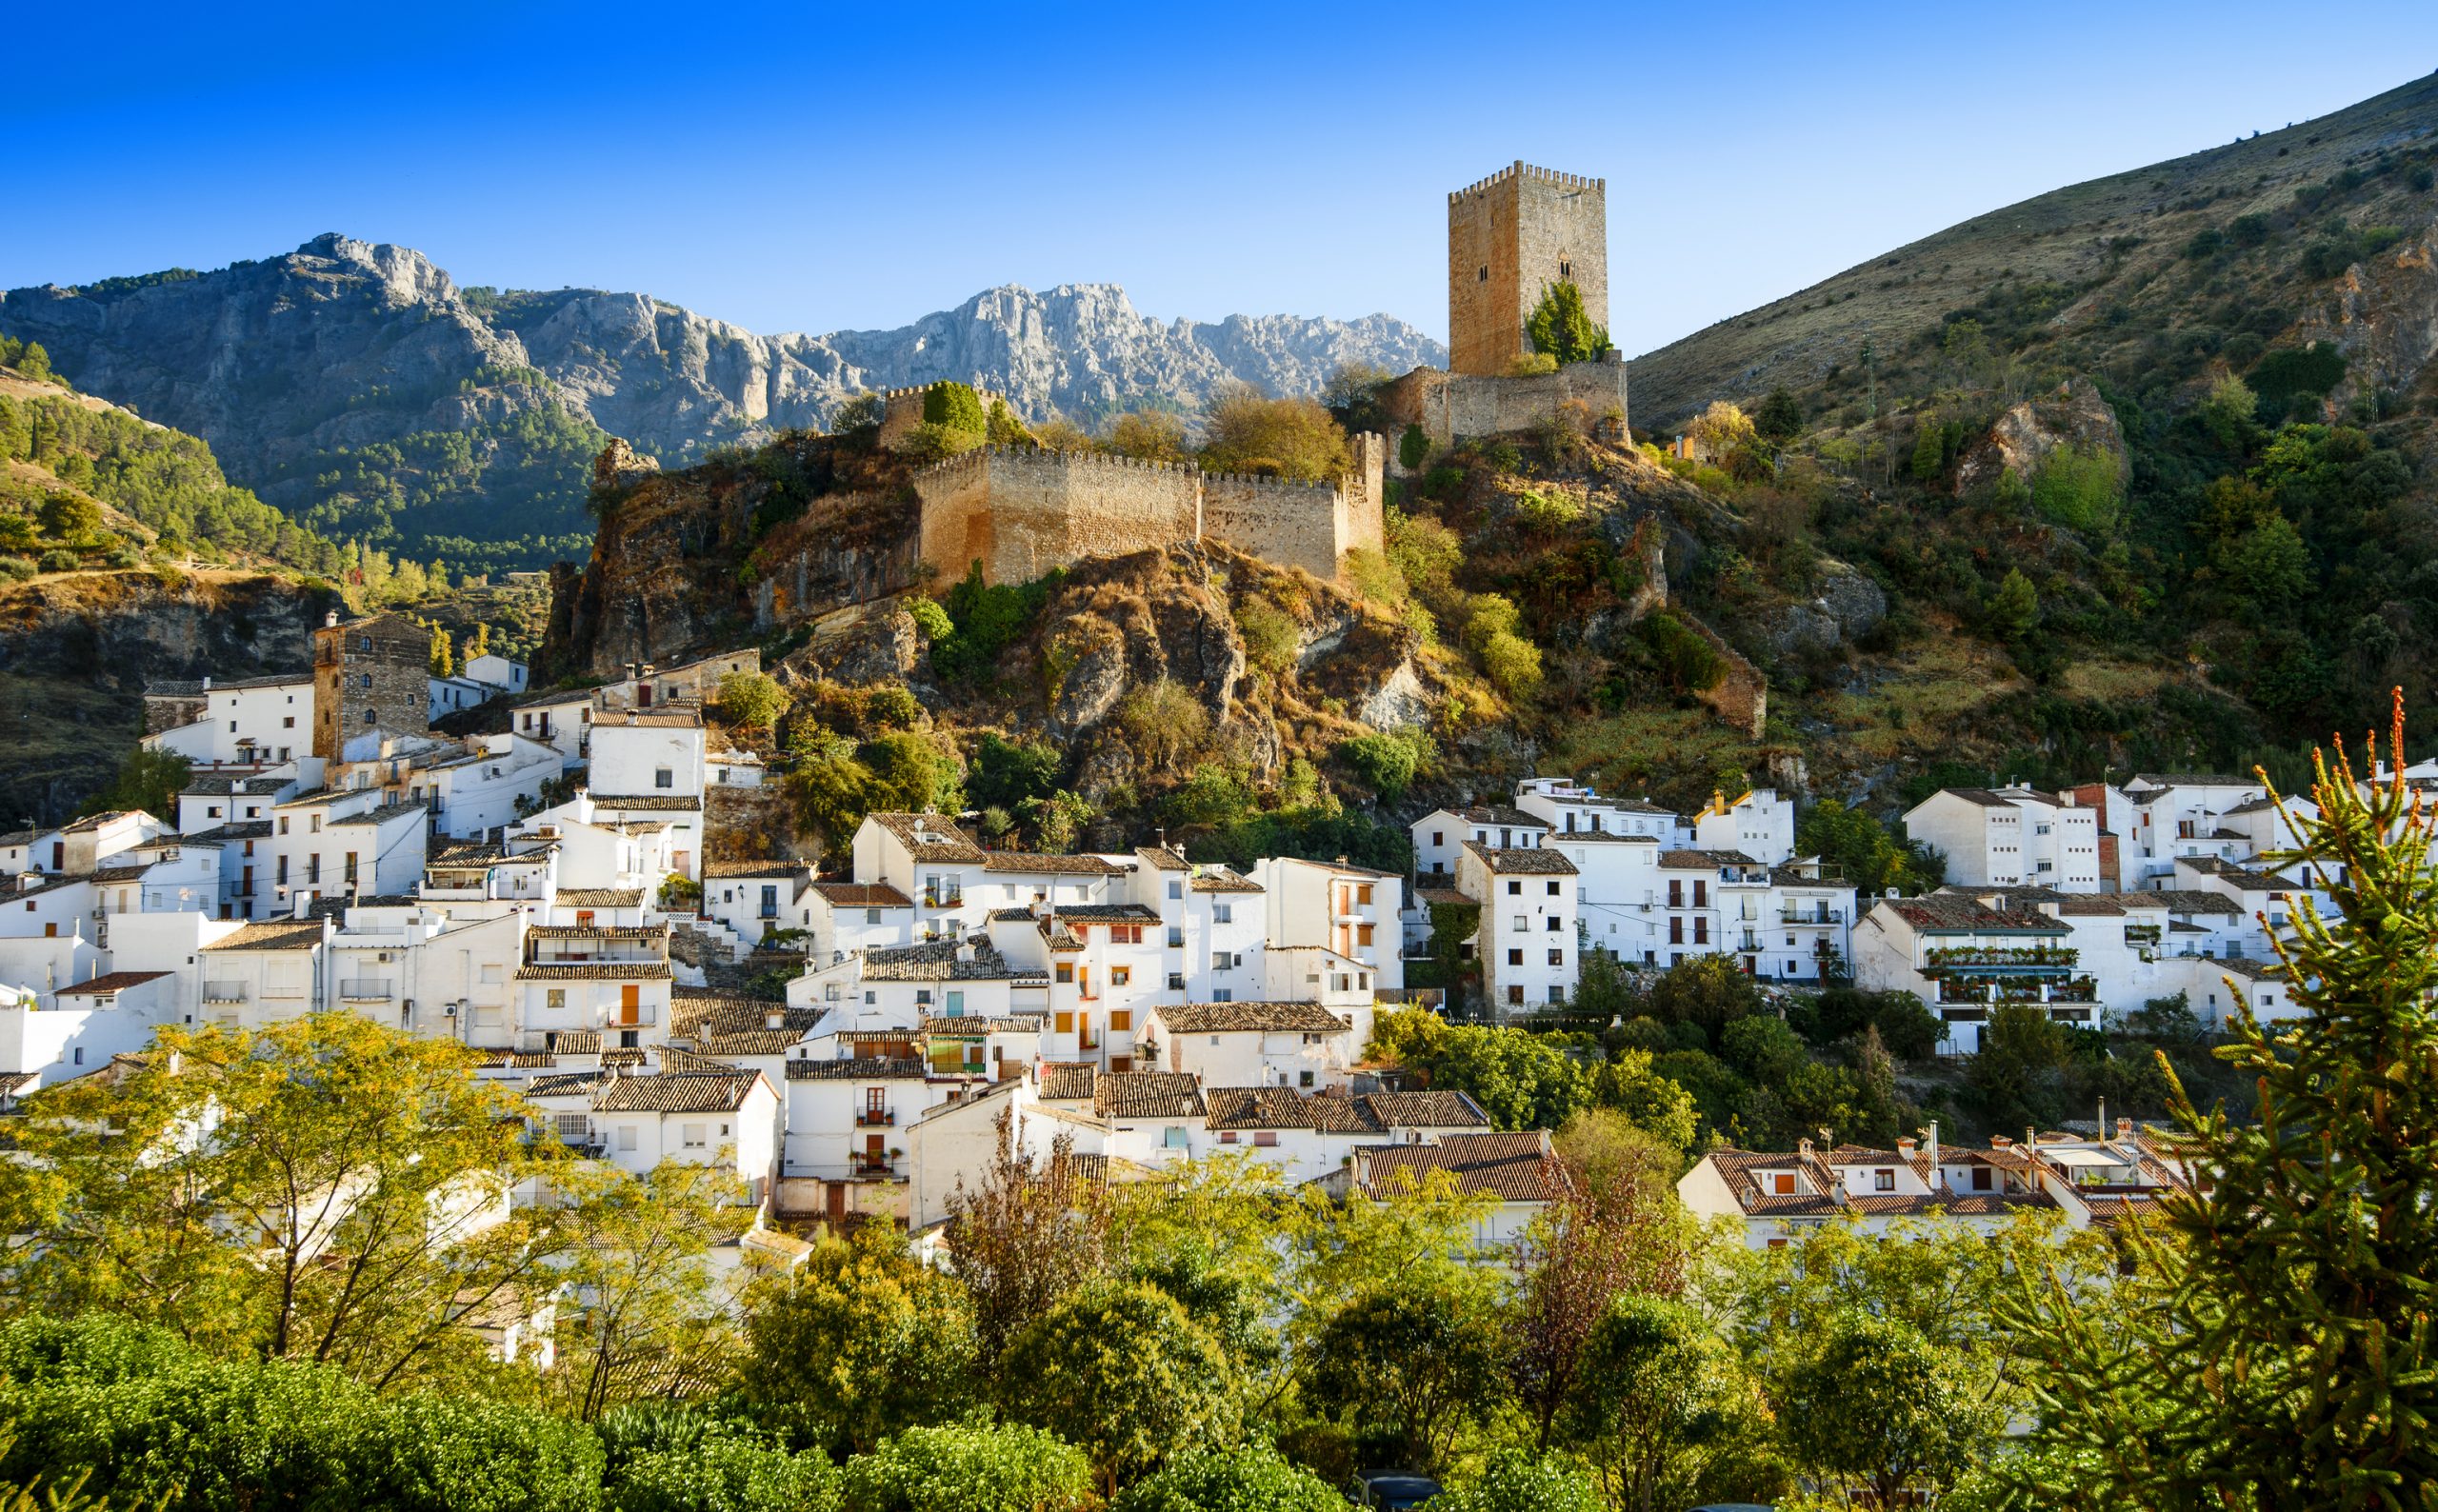 What to see in Cazorla